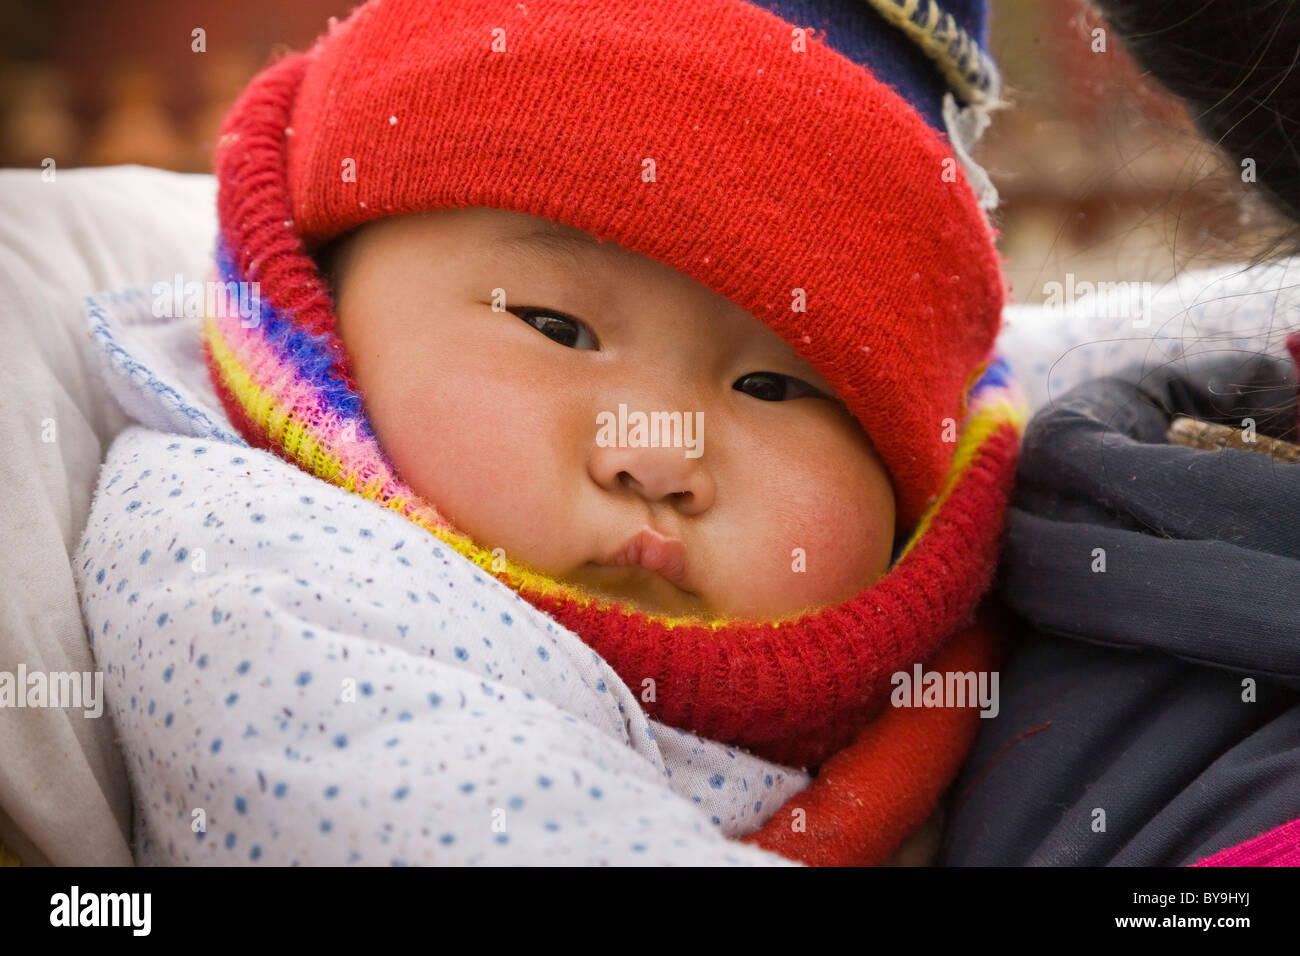 Tibetan baby in papoose on mother's back in the Barkhor Lhasa Tibet.  JMH4659 Stock Photo - Alamy